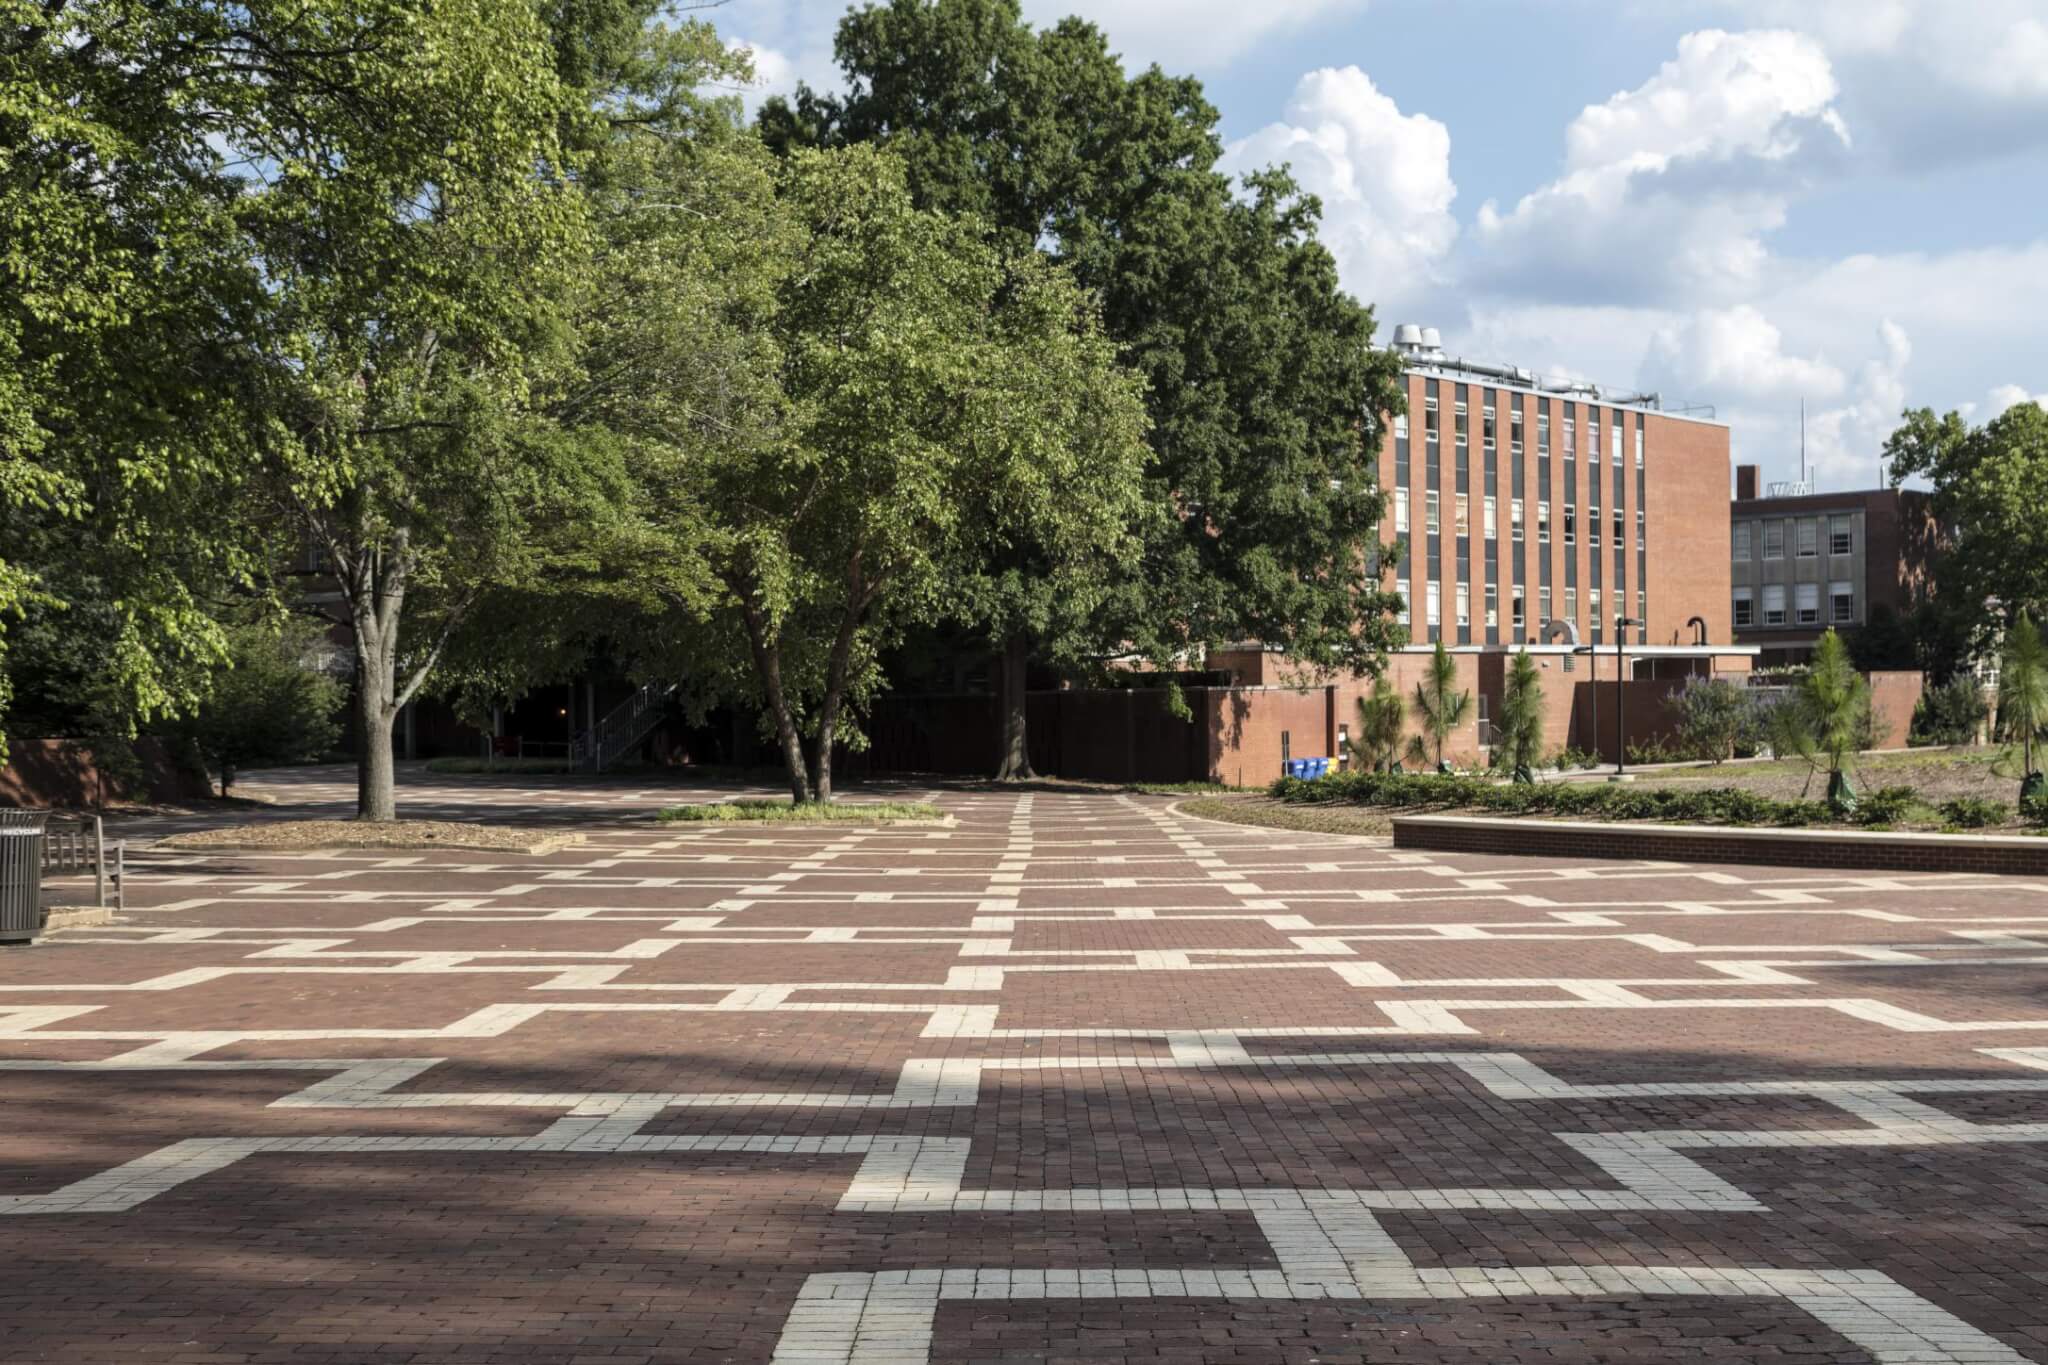 N.C. State campus master plan may alter the famous Brickyard